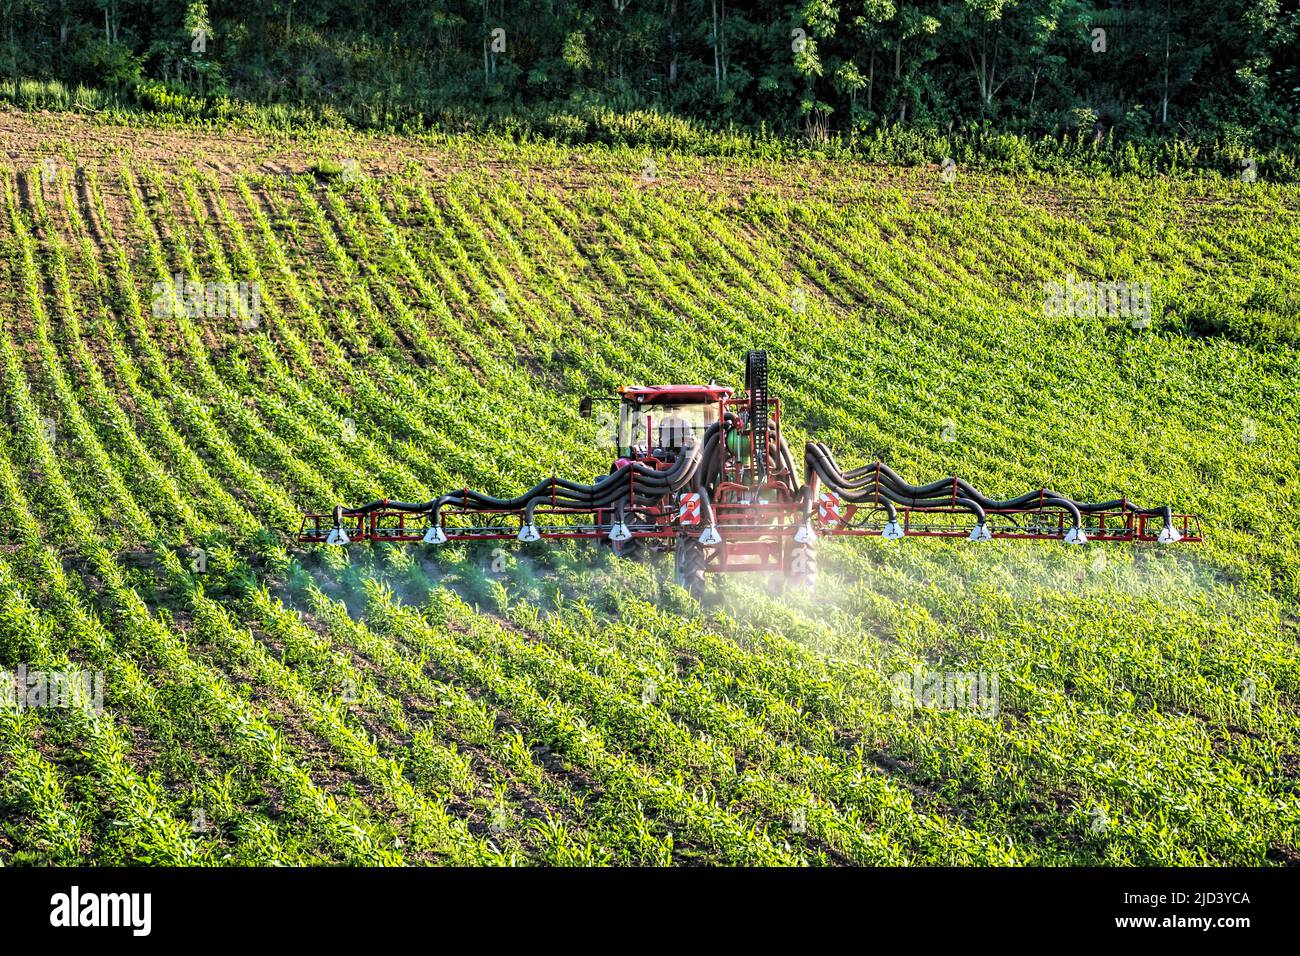 Farm tractor spraying pesticides over the field of ripening corn plants Stock Photo